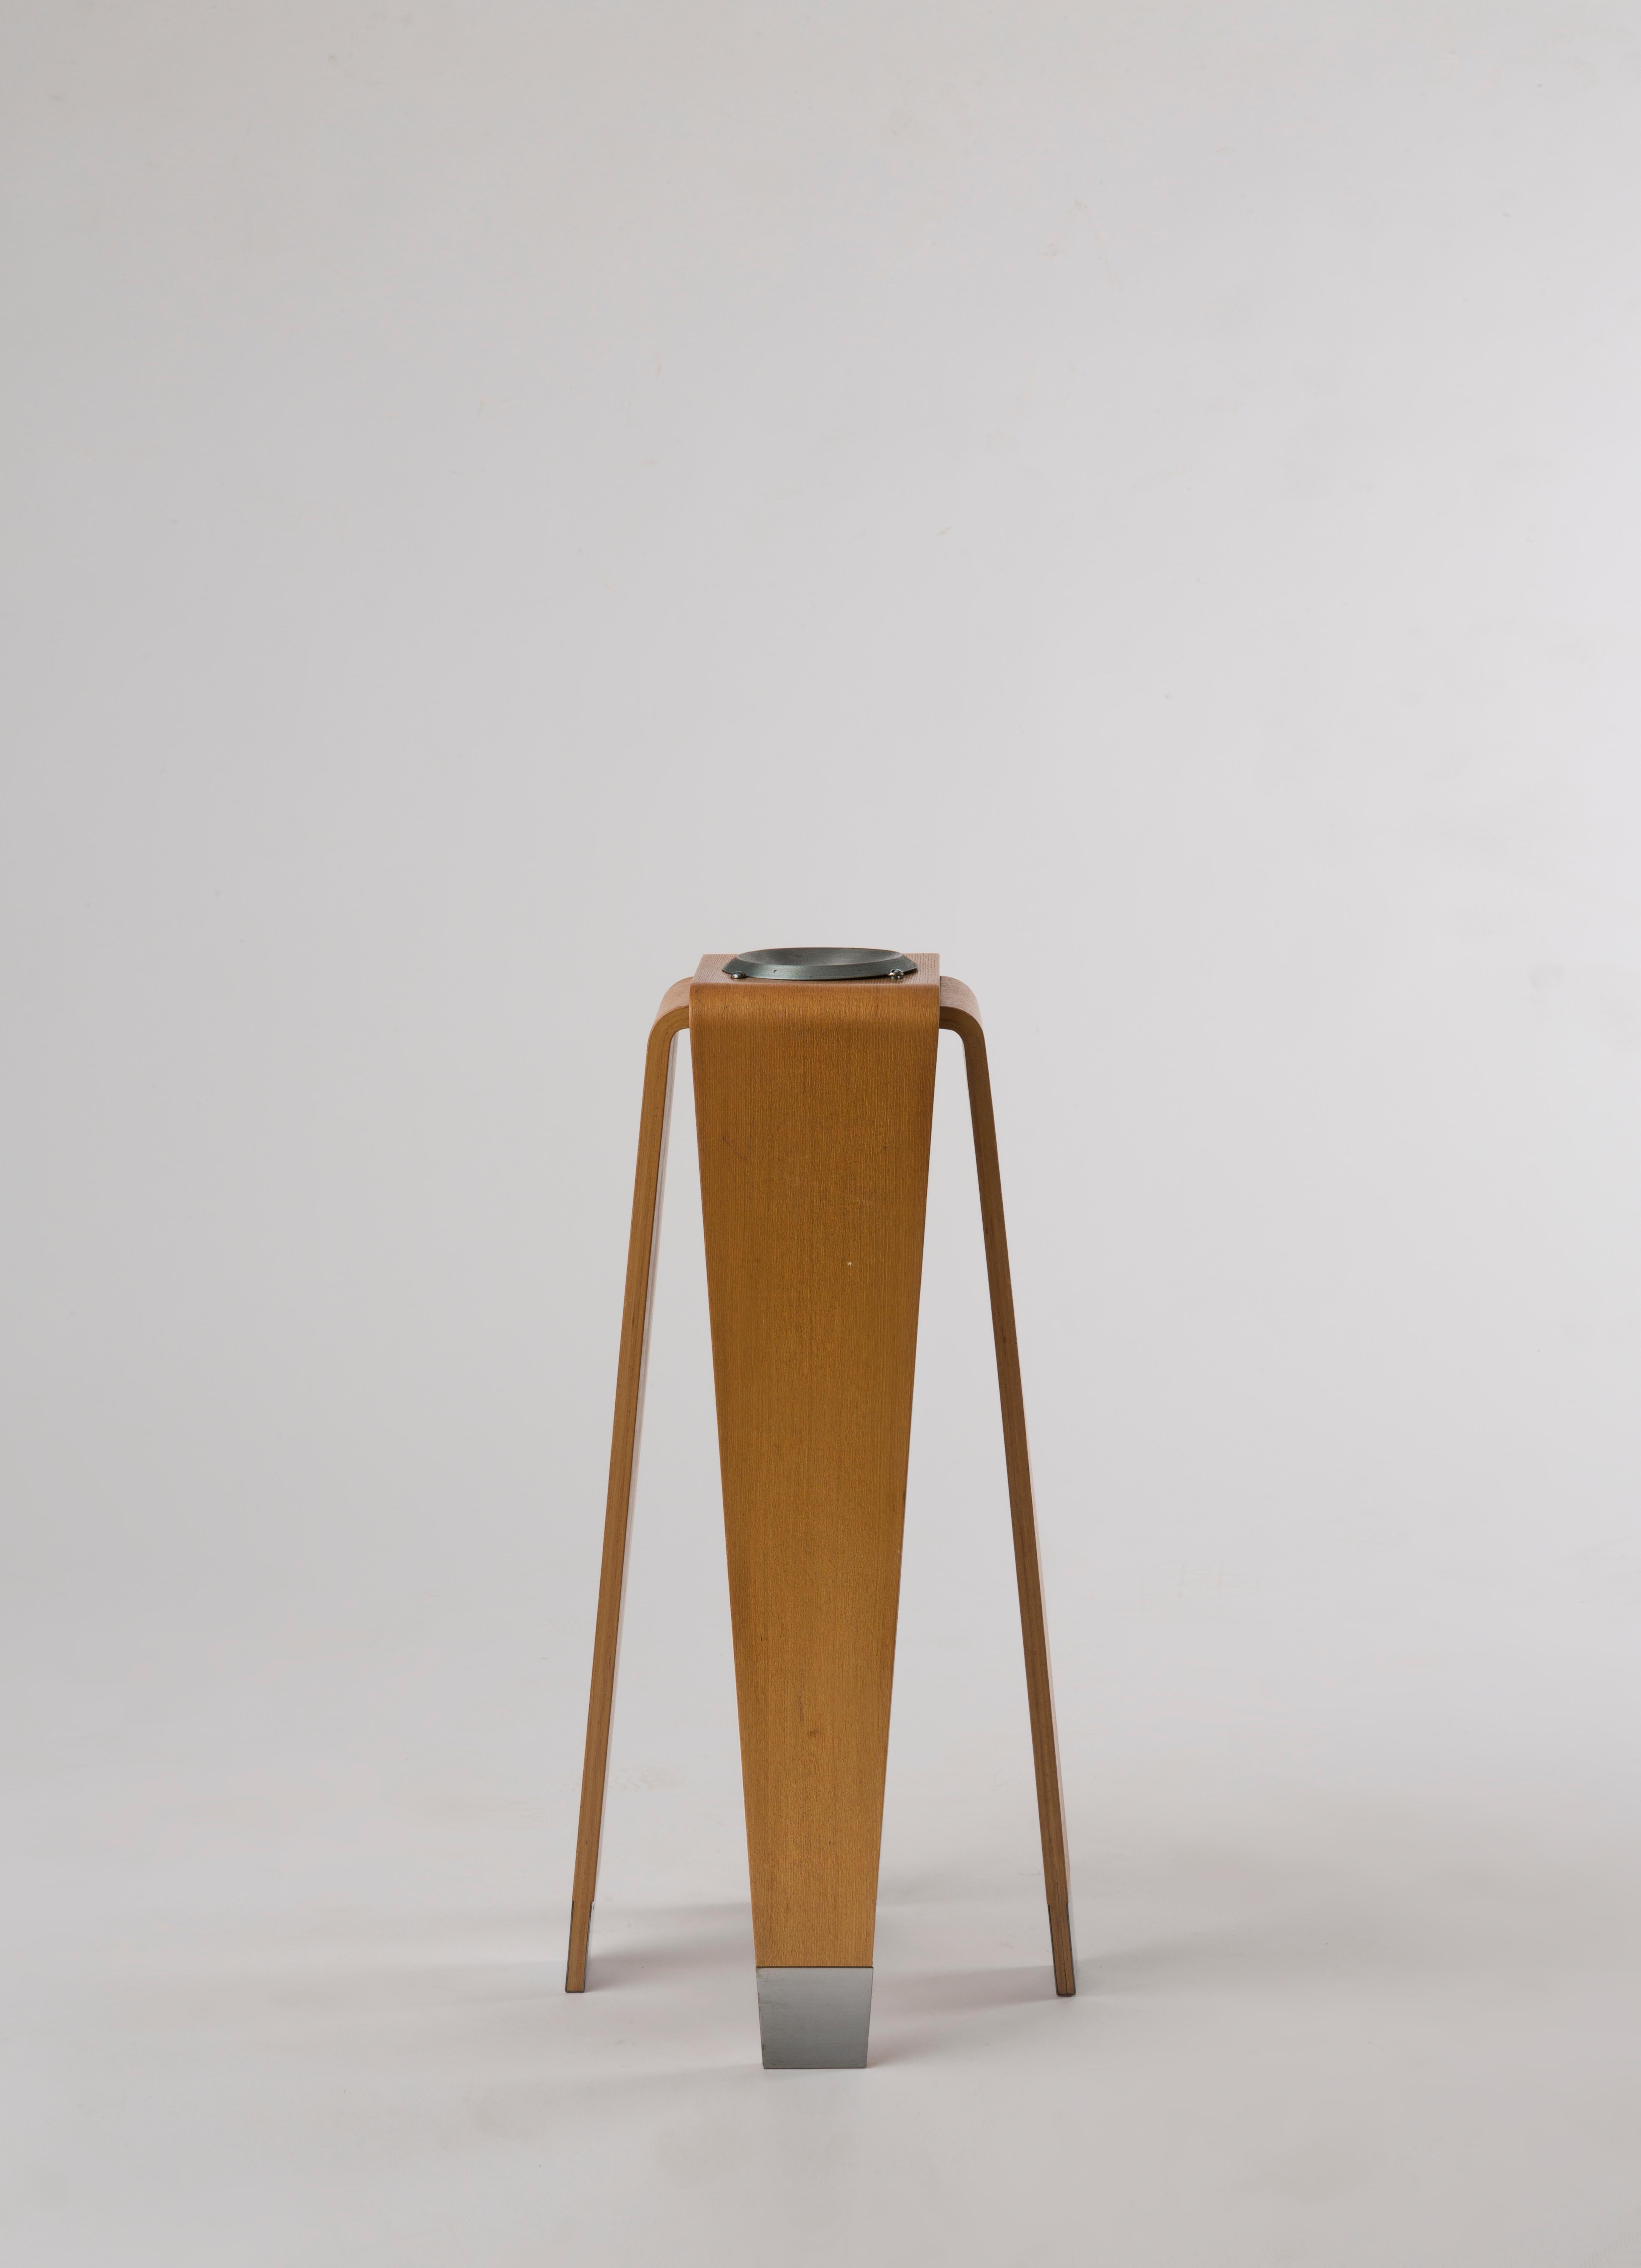 An ashtray on a stand by the Japanese architect and designer Kenzo Tange (1913-2005), in laminated plywood and metal, manufactured by Tendo Mokko, Japan, circa 1950’s